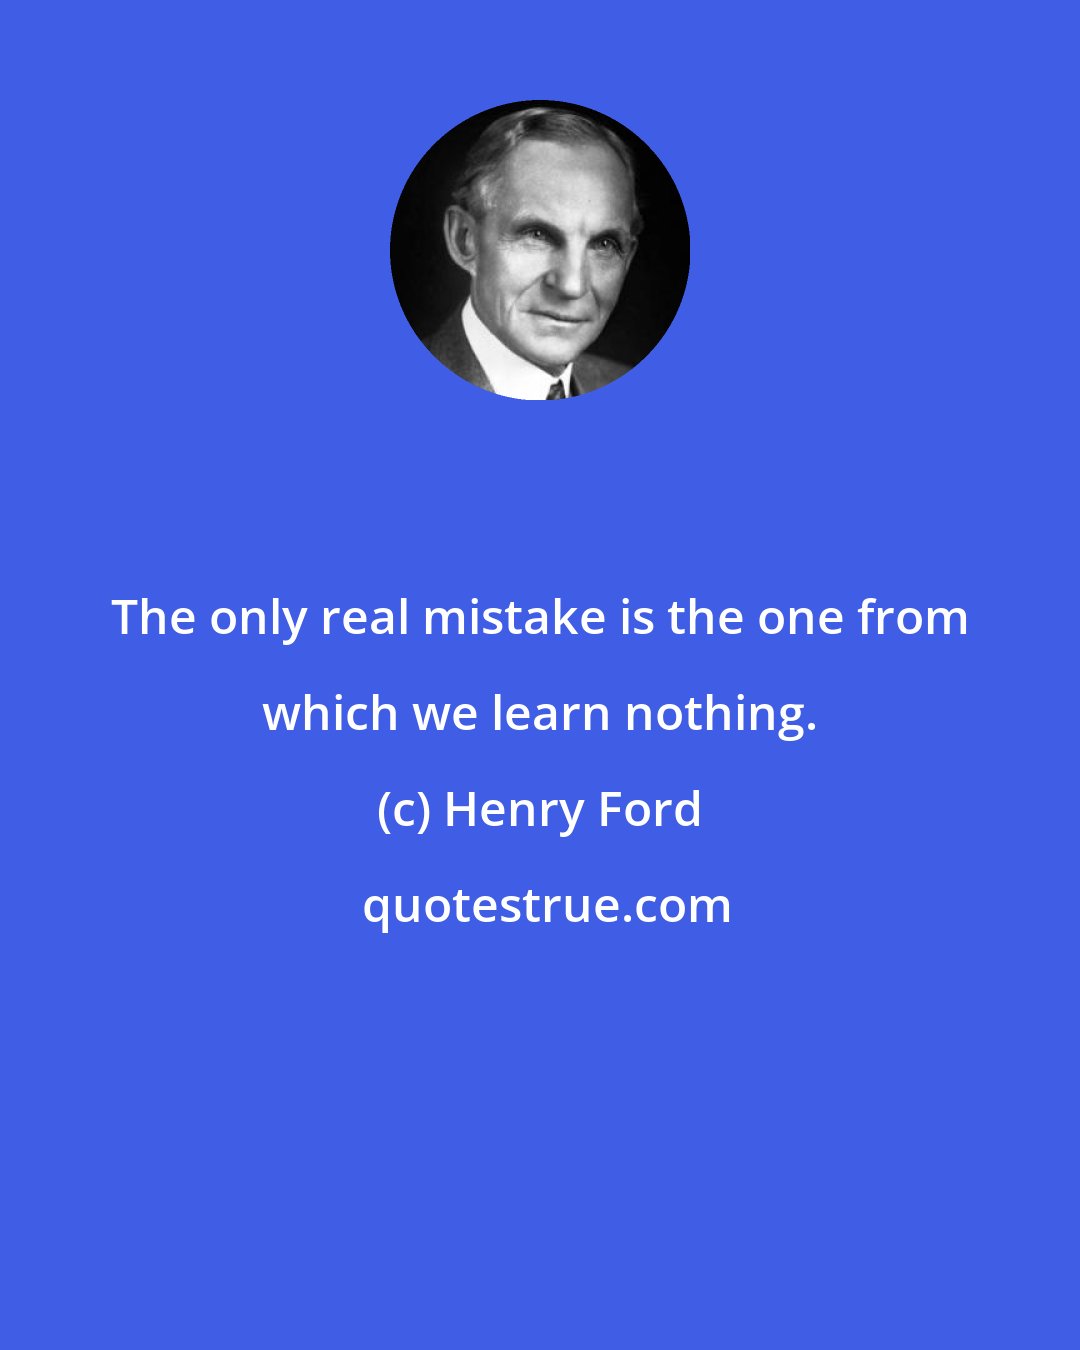 Henry Ford: The only real mistake is the one from which we learn nothing.